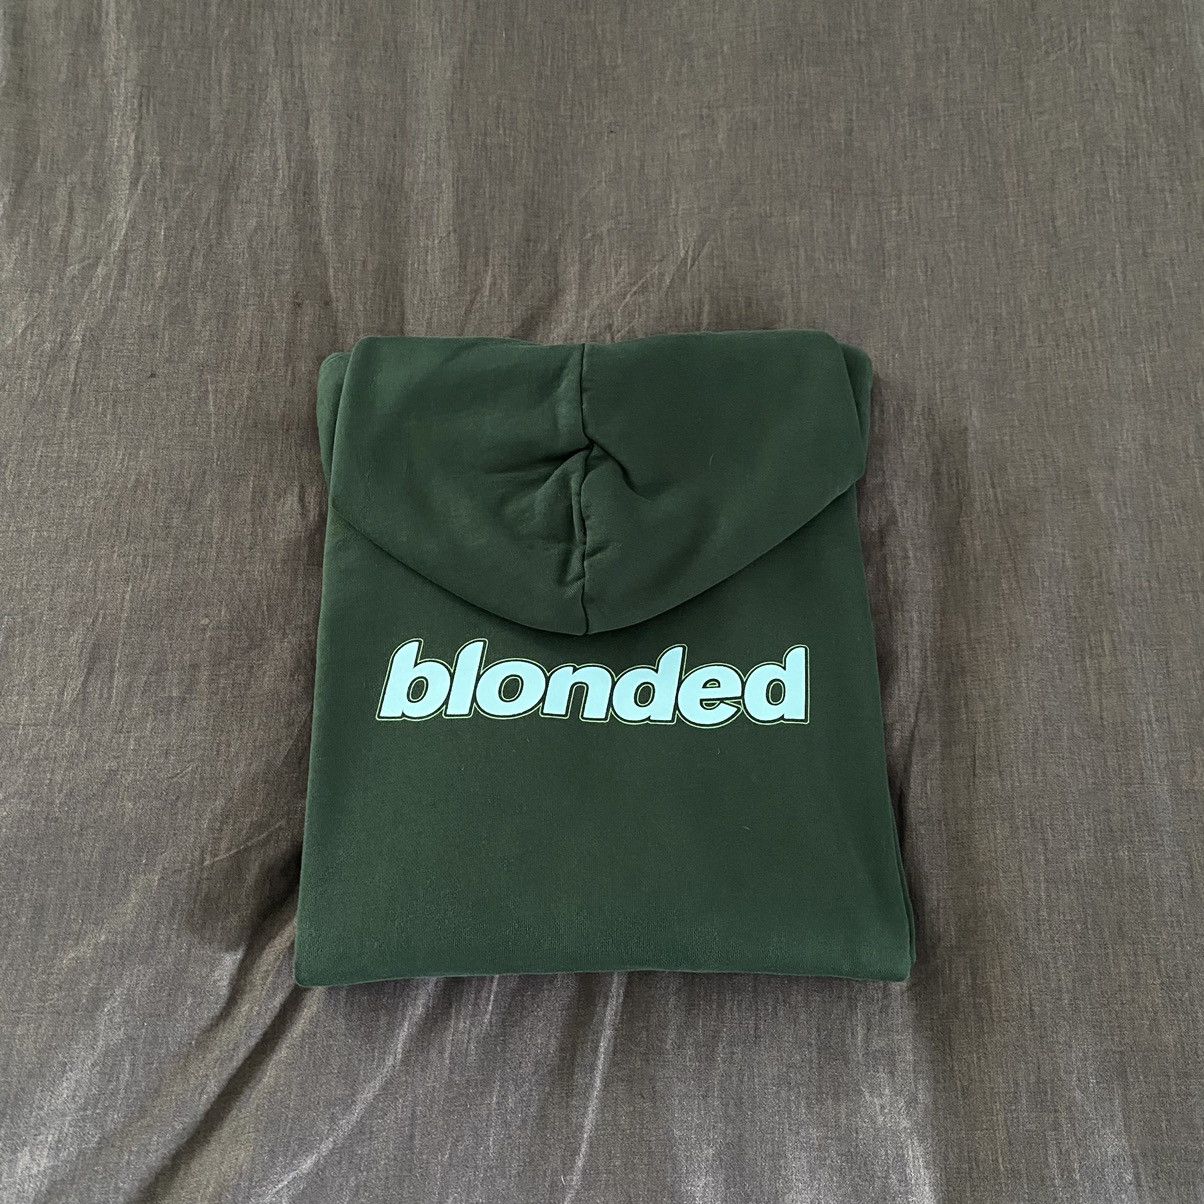 Frank Ocean Blonded Hoodie (Green) Size US L / EU 52-54 / 3 - 9 Preview